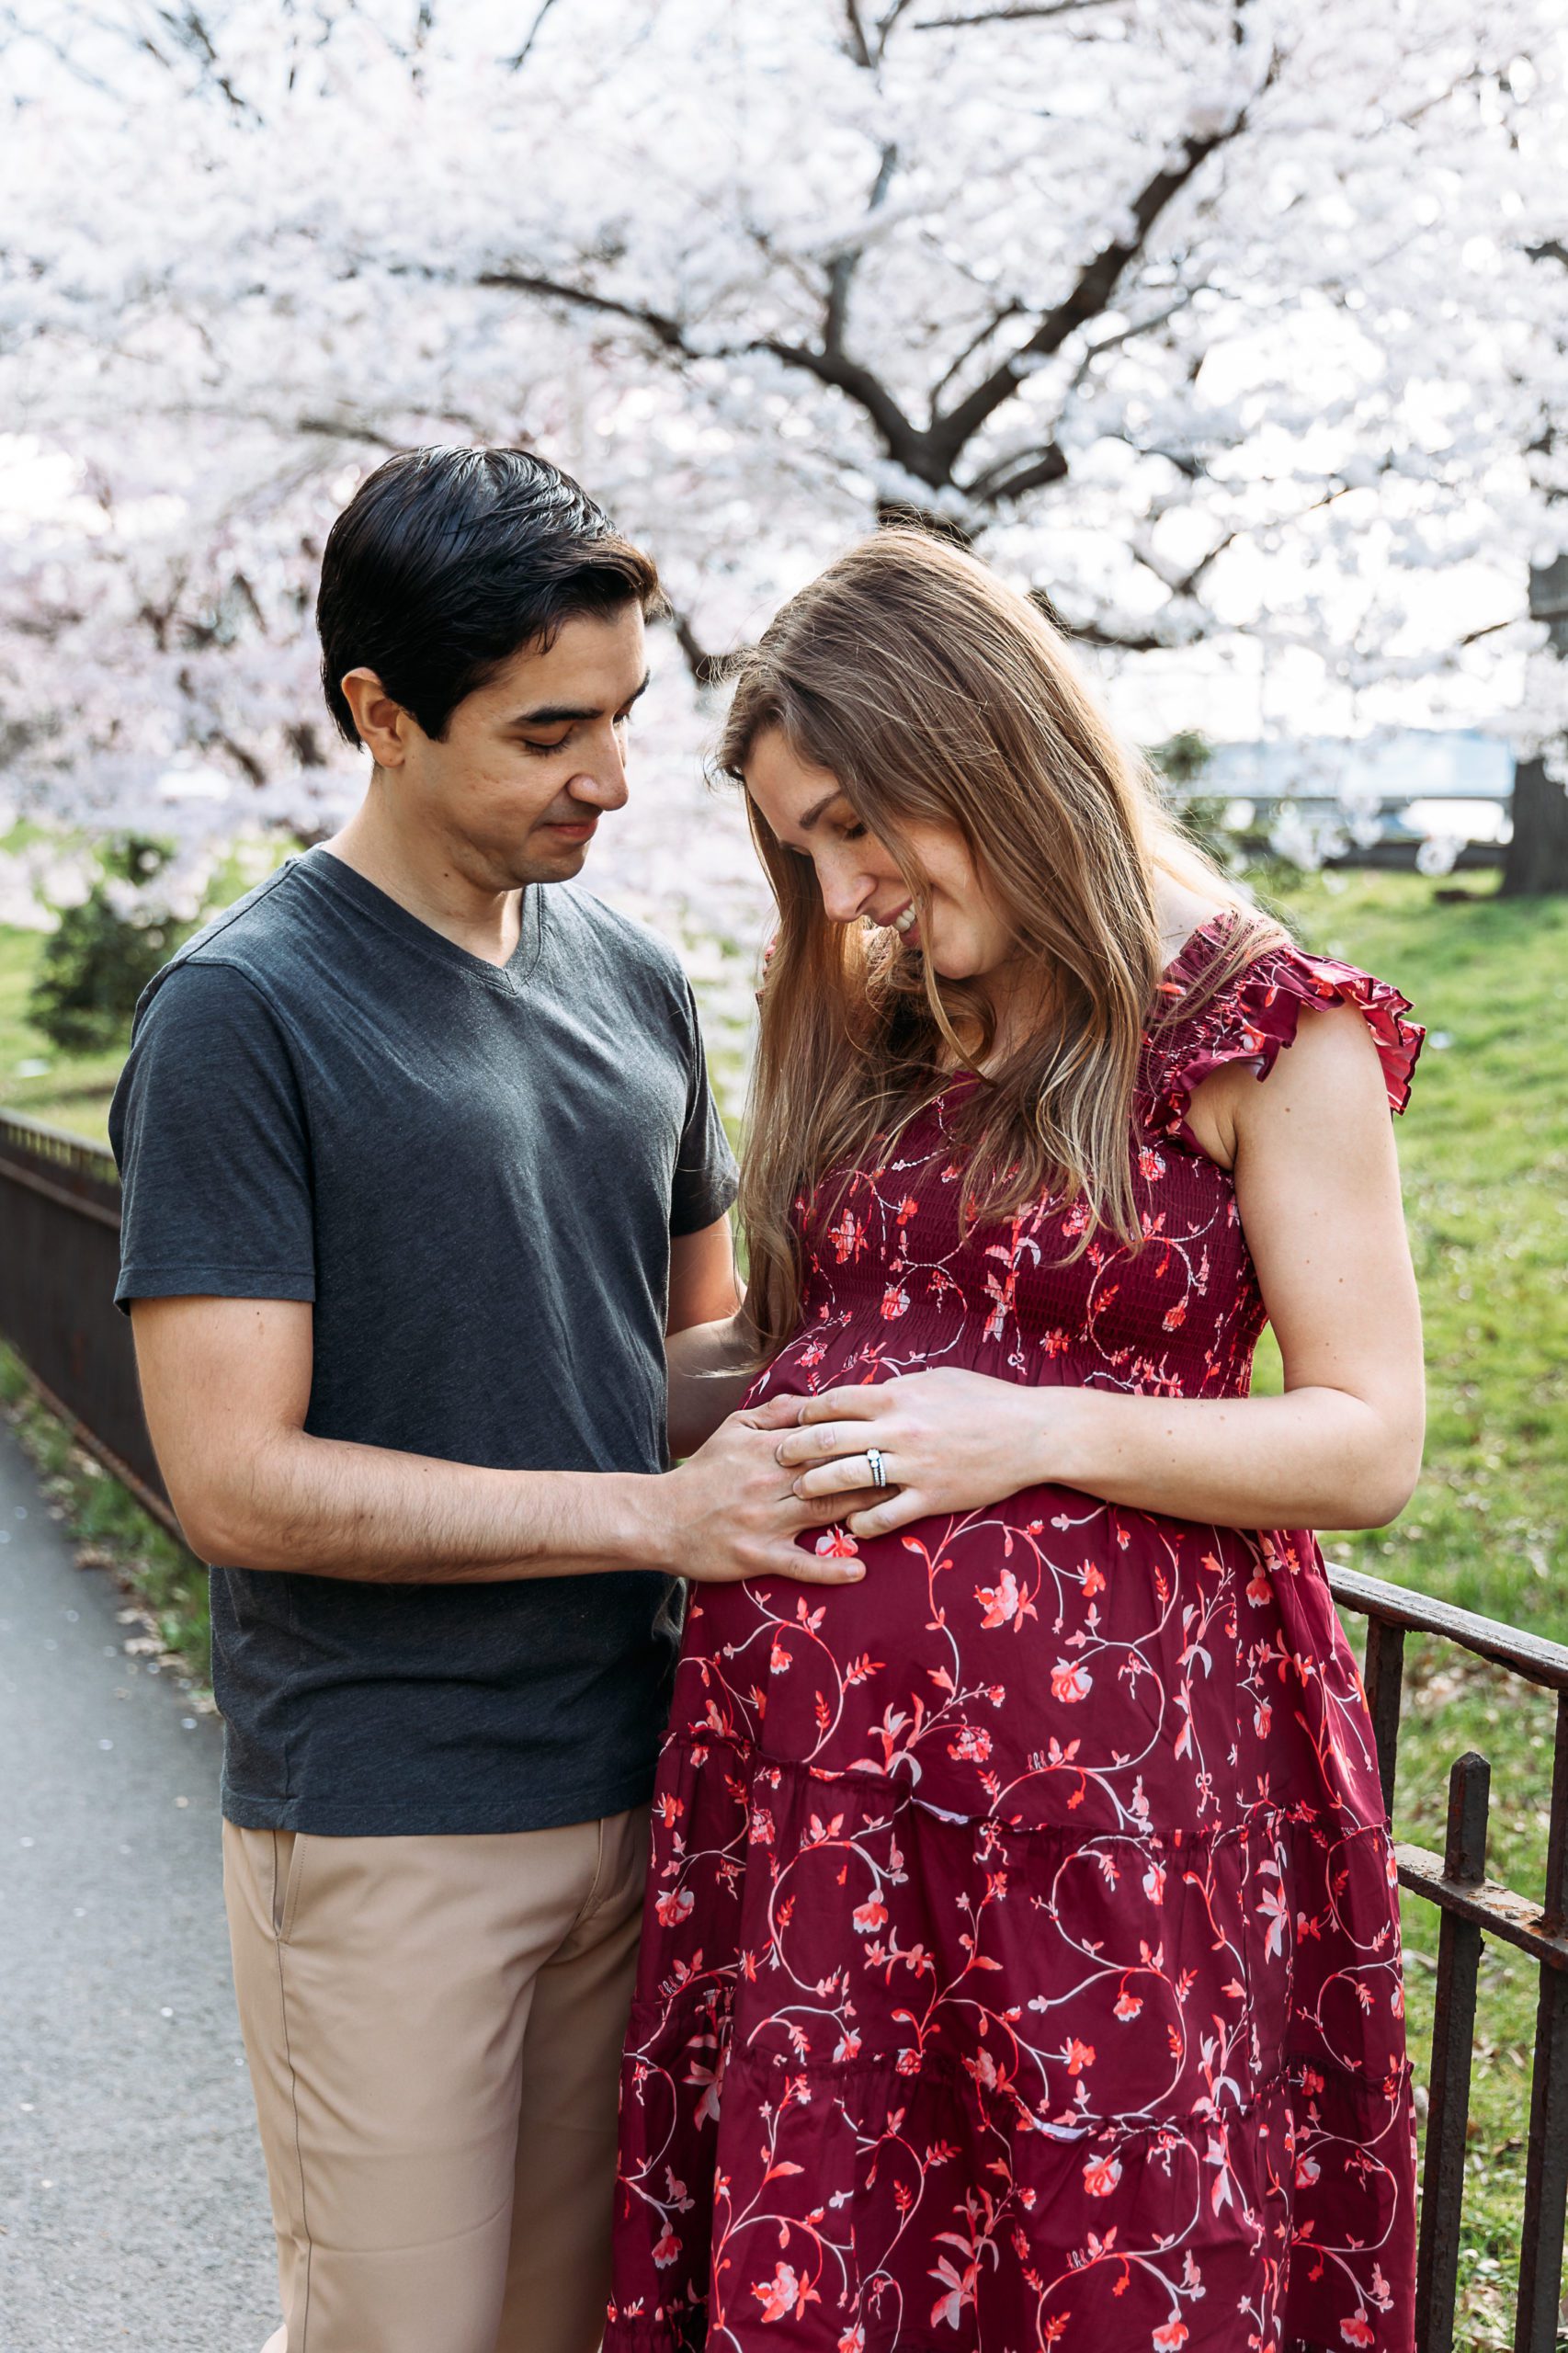 Outdoor Spring Maternity photoshoot poses and outfits in New York City Westchester County outside their New York apartment photographed by Amy Nghe Photography NYC Maternity Photographer